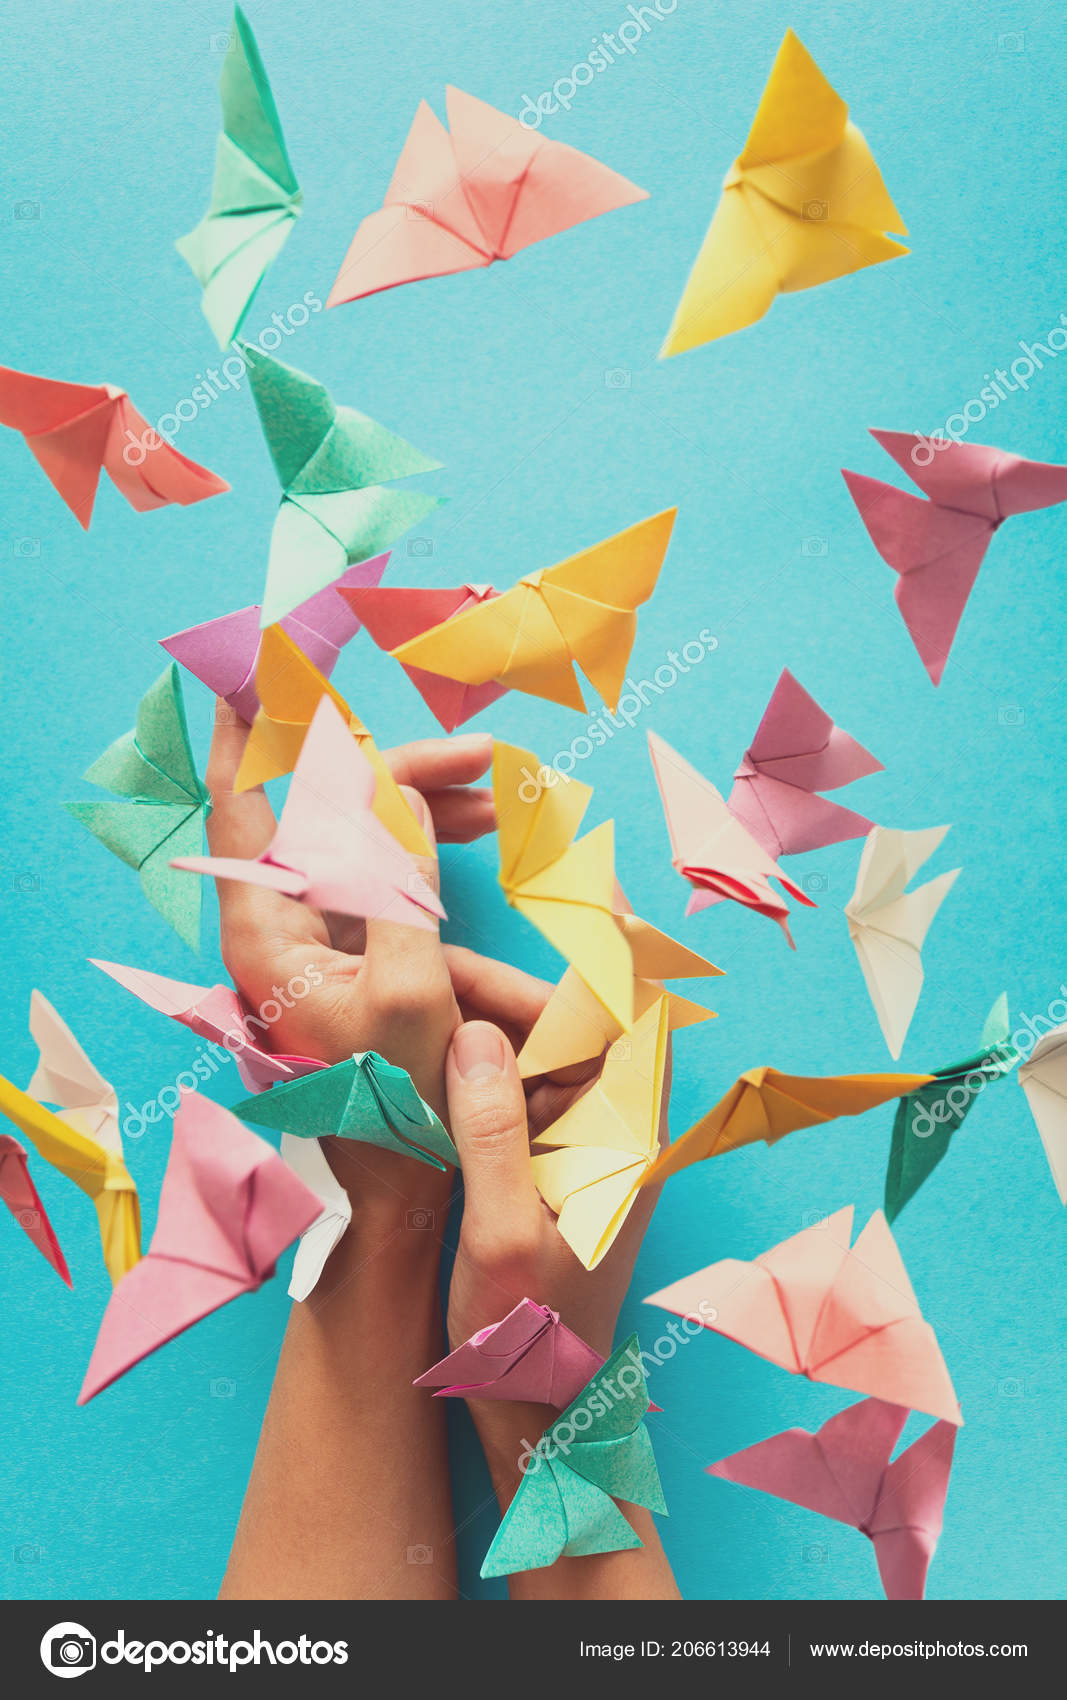 Harmony Origami Paper Mental Health Concept Colorful Paper Butterflies Flying Sitting